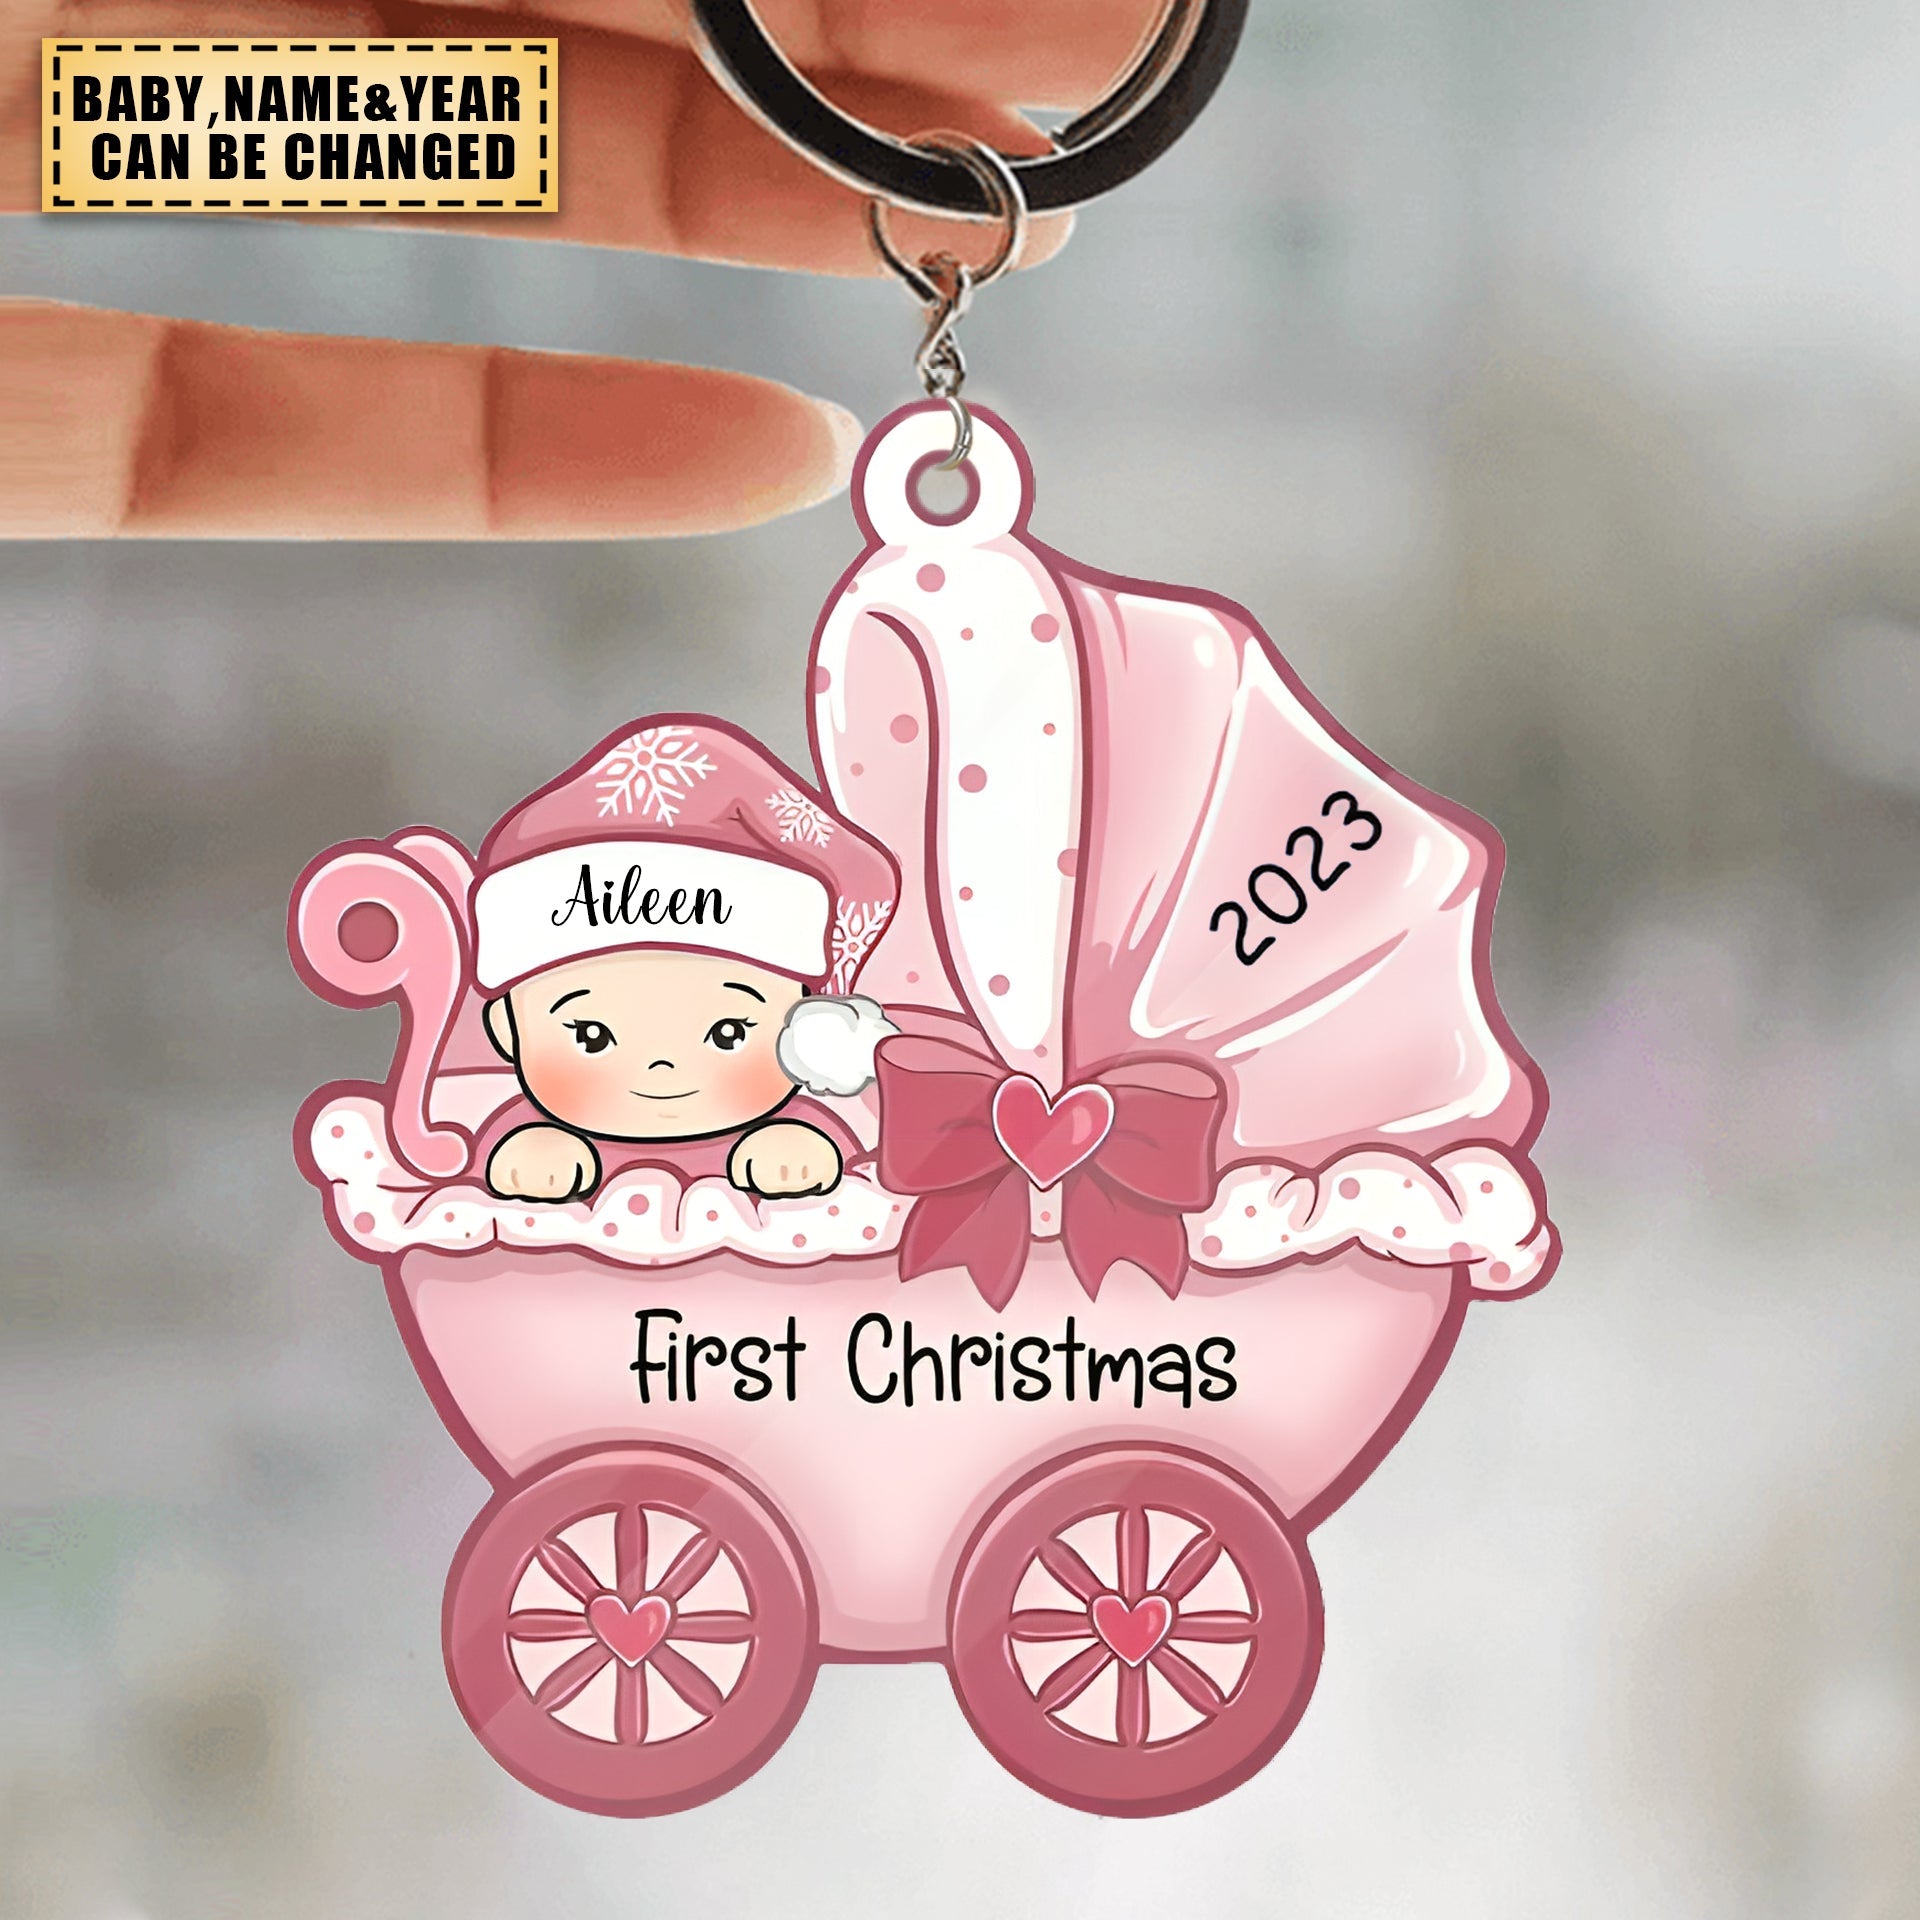 Baby's First Christmas, Baby Carriage, Custom Gift for Baby - Personalized Acrylic Keychain